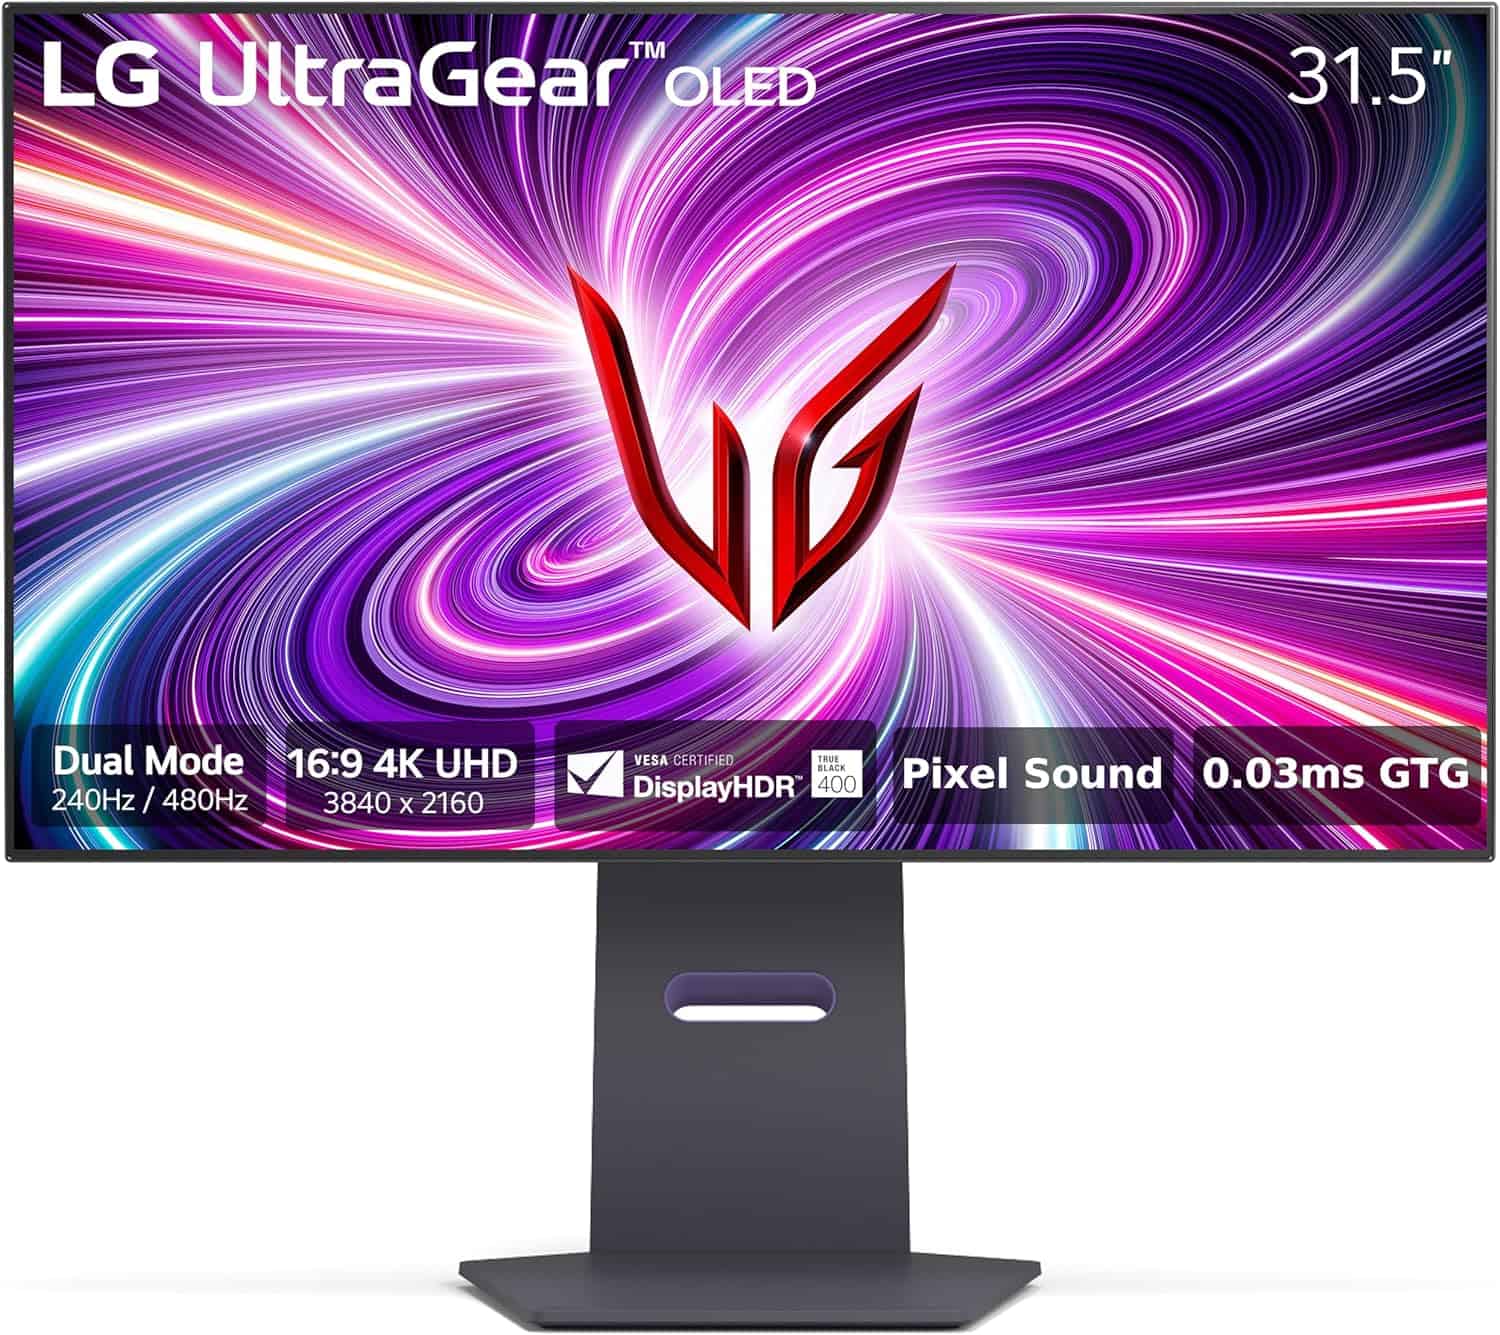 LG UltraGear 32GS95UE OLED 31.5" gaming monitor displaying a colorful abstract swirl with prominent red logo, highlighting features like 4K resolution, HDR, and 0.